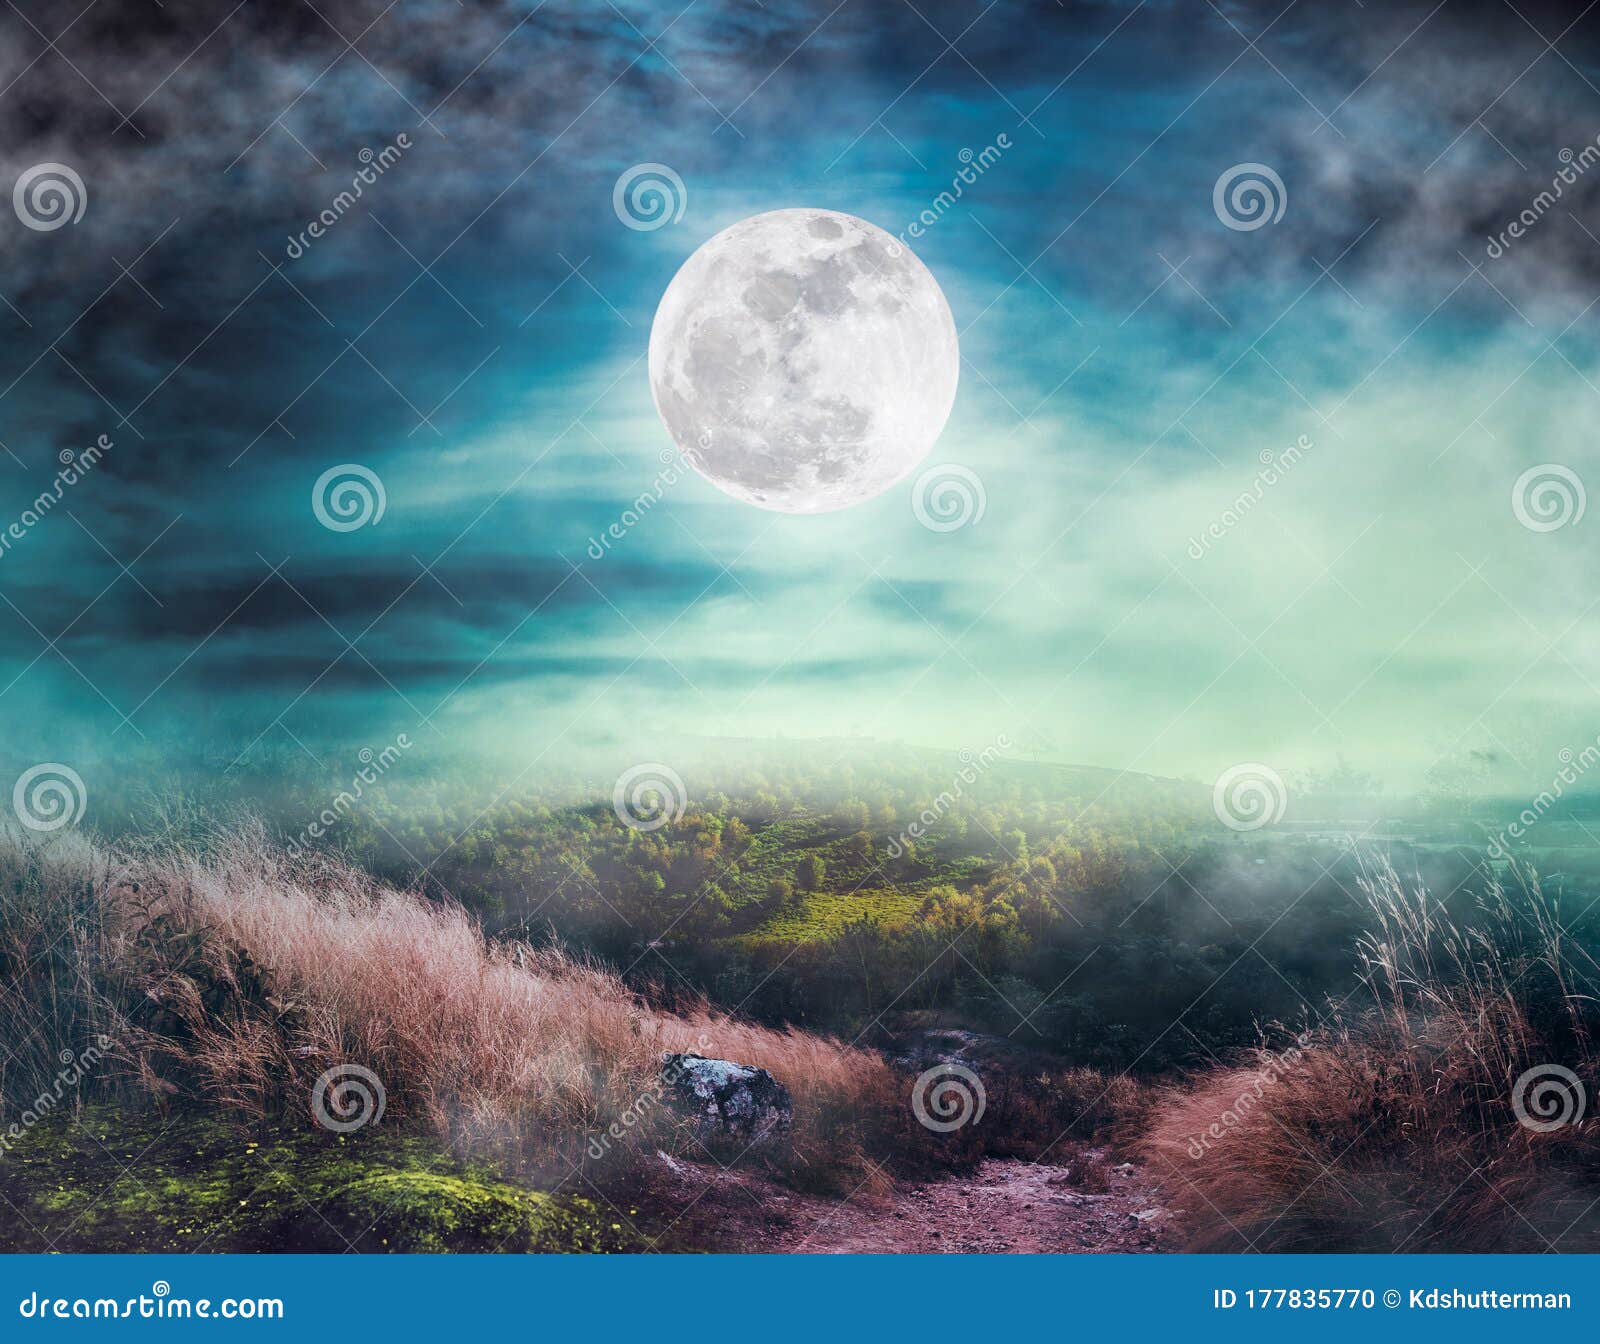 beautiful bright full moon above wilderness area in forest. serenity nature background